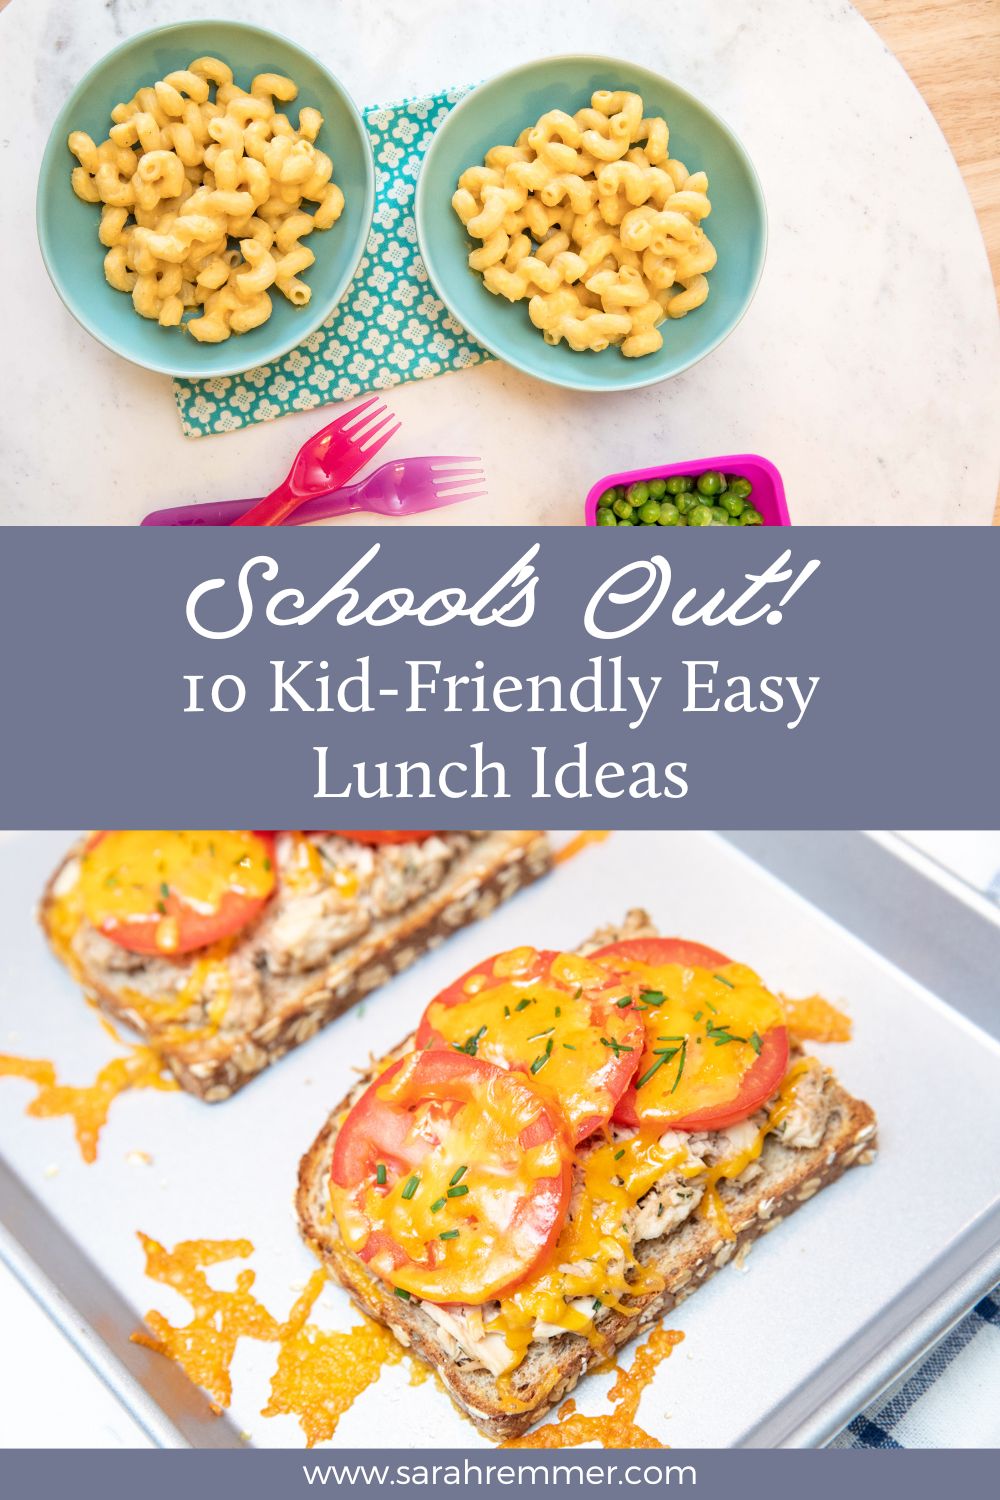 It's important that kids eat a balanced, nutritious lunch. Here are 10 kid-friendly lunch ideas for busy families to make!